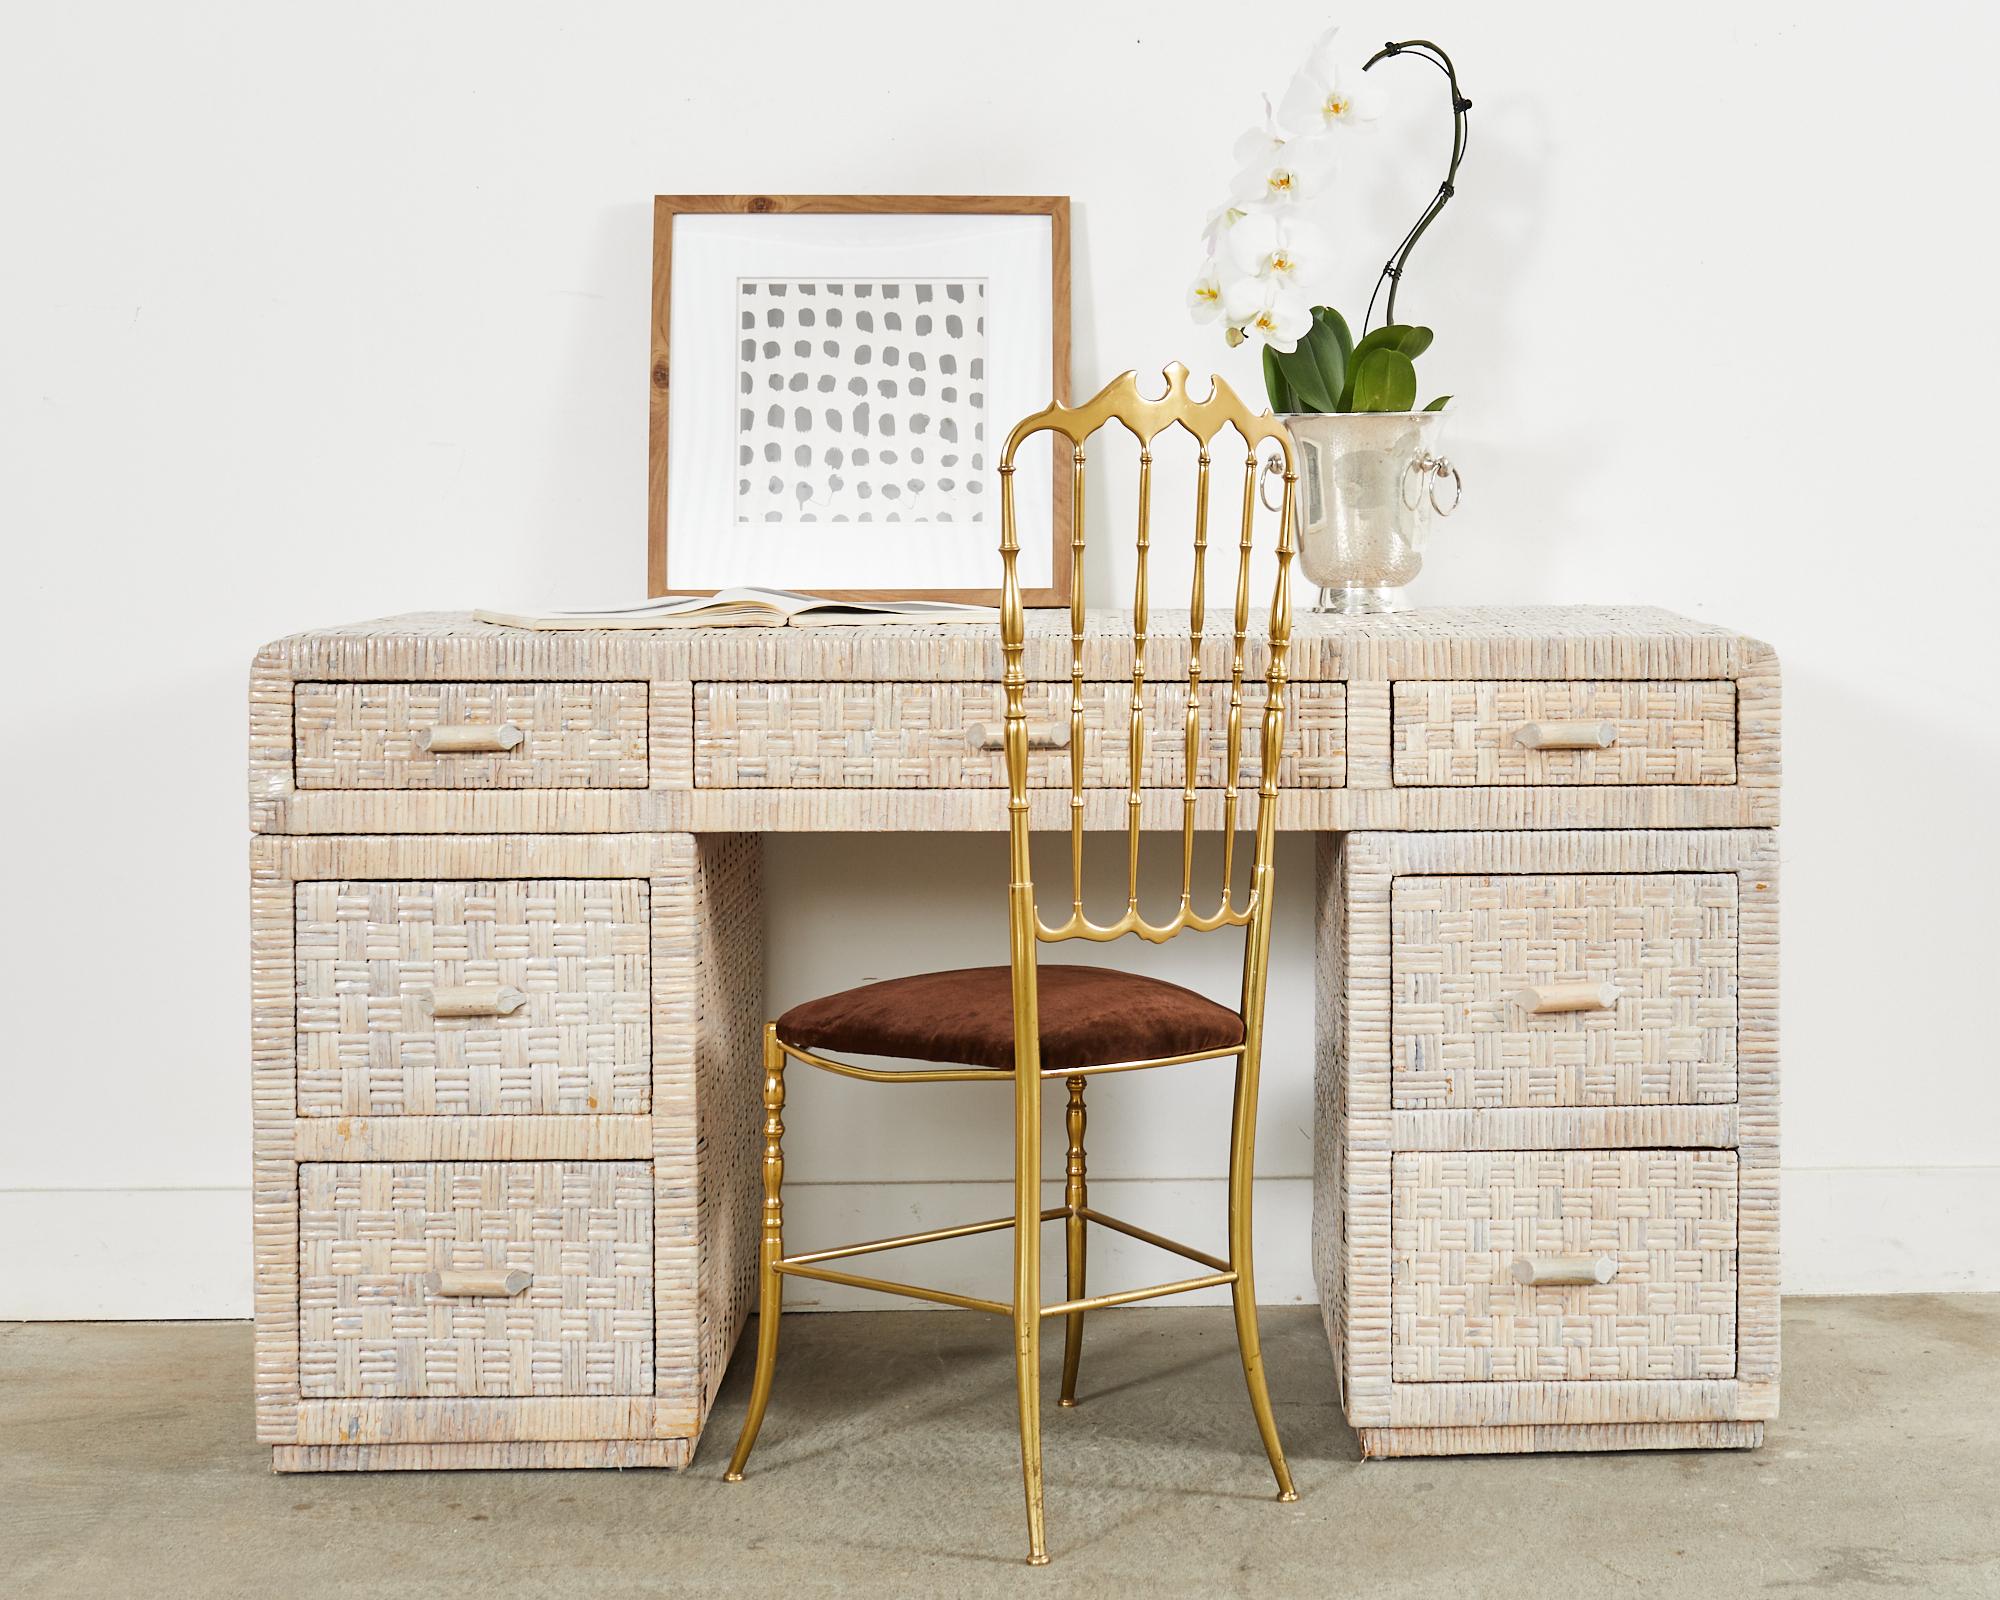 Stylish kneehole or pedestal desk featuring a wood frame covered with basketweave rattan wicker. The three piece desk is embellished on all sides with geometric woven wicker having a cerused style painted finish. The drawers open and close smoothly